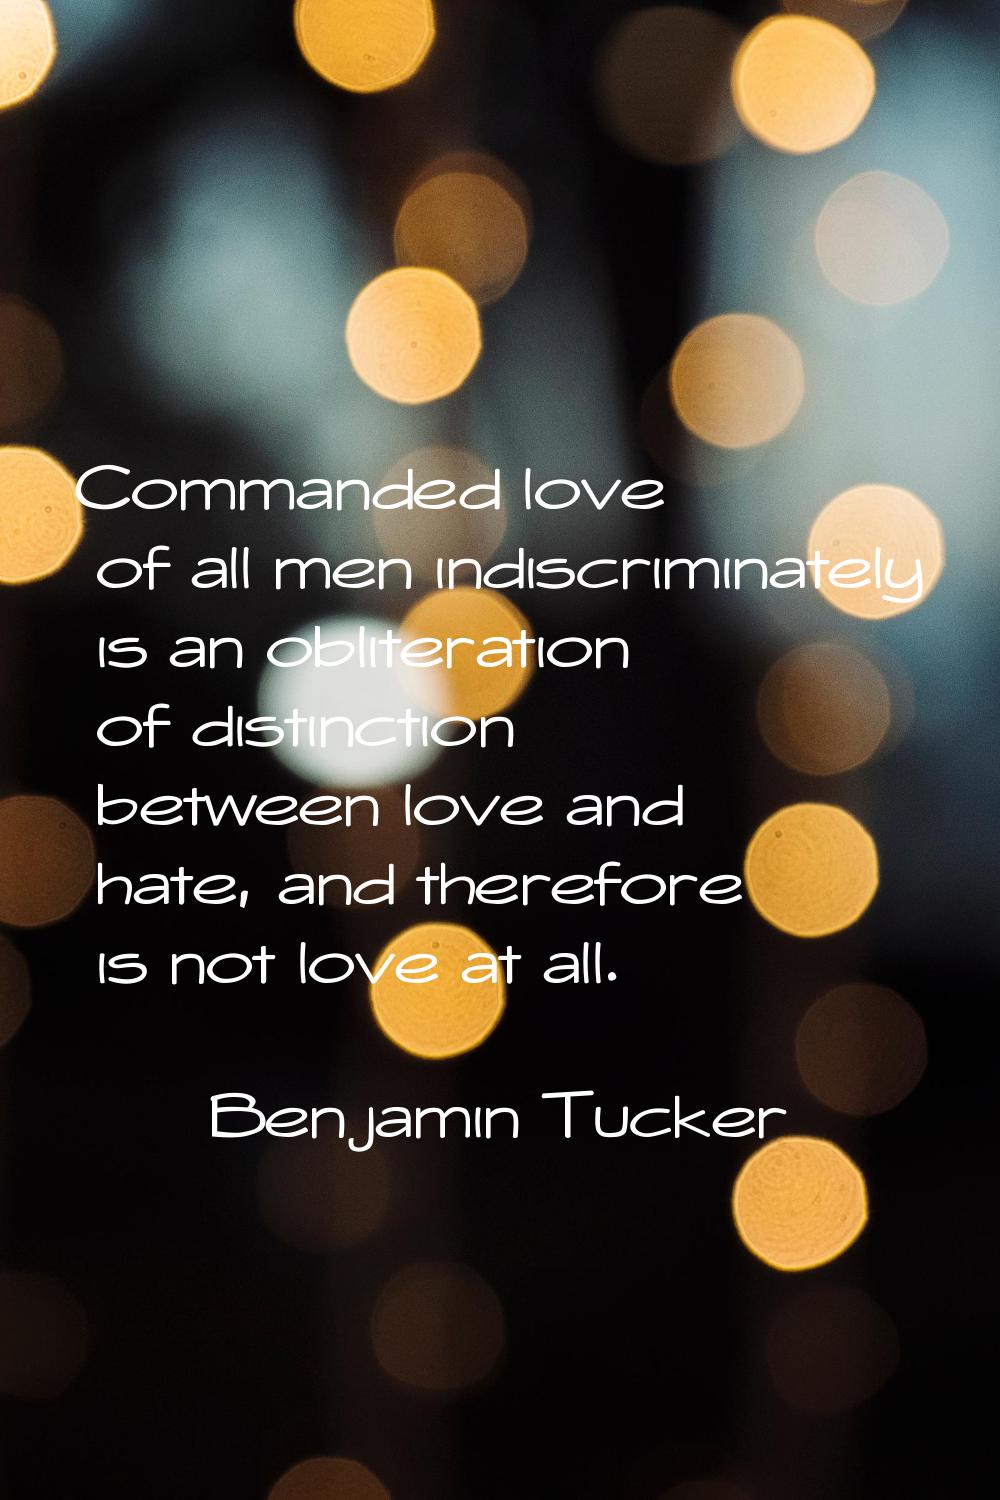 Commanded love of all men indiscriminately is an obliteration of distinction between love and hate,